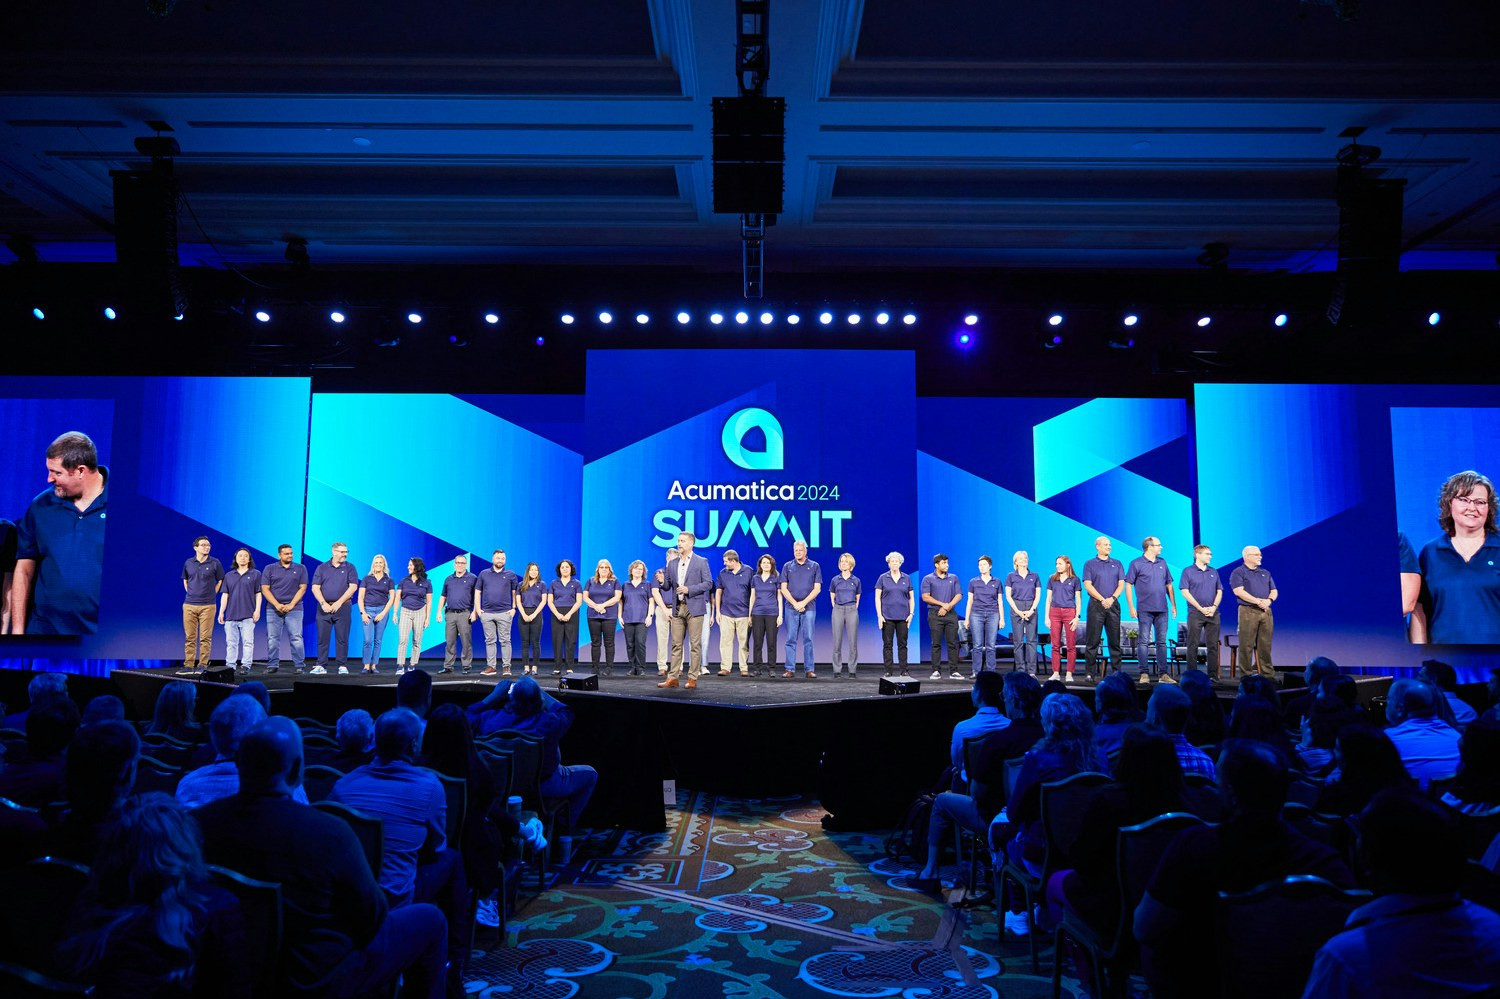 John Case, CEO, is joined on stage by Acumatica employees at company's 2024 Acumatica's Summit event. 